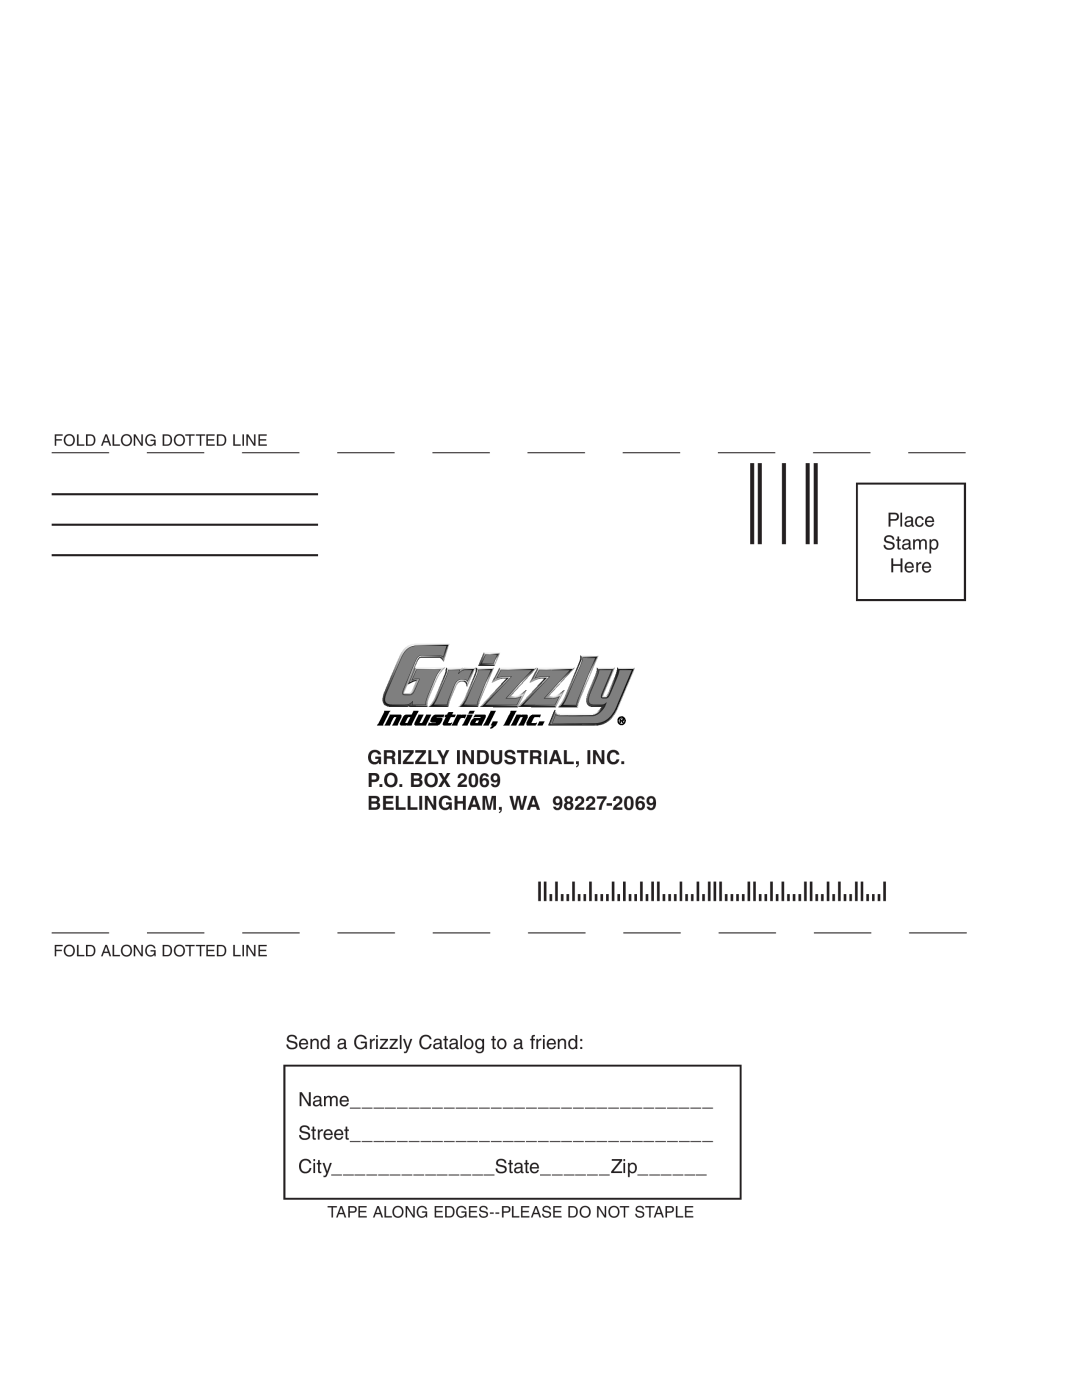 Grizzly G9956 Place Stamp Here, Grizzly Industrial, Inc P.O. Box Bellingham, Wa, Send a Grizzly Catalog to a friend, Name 